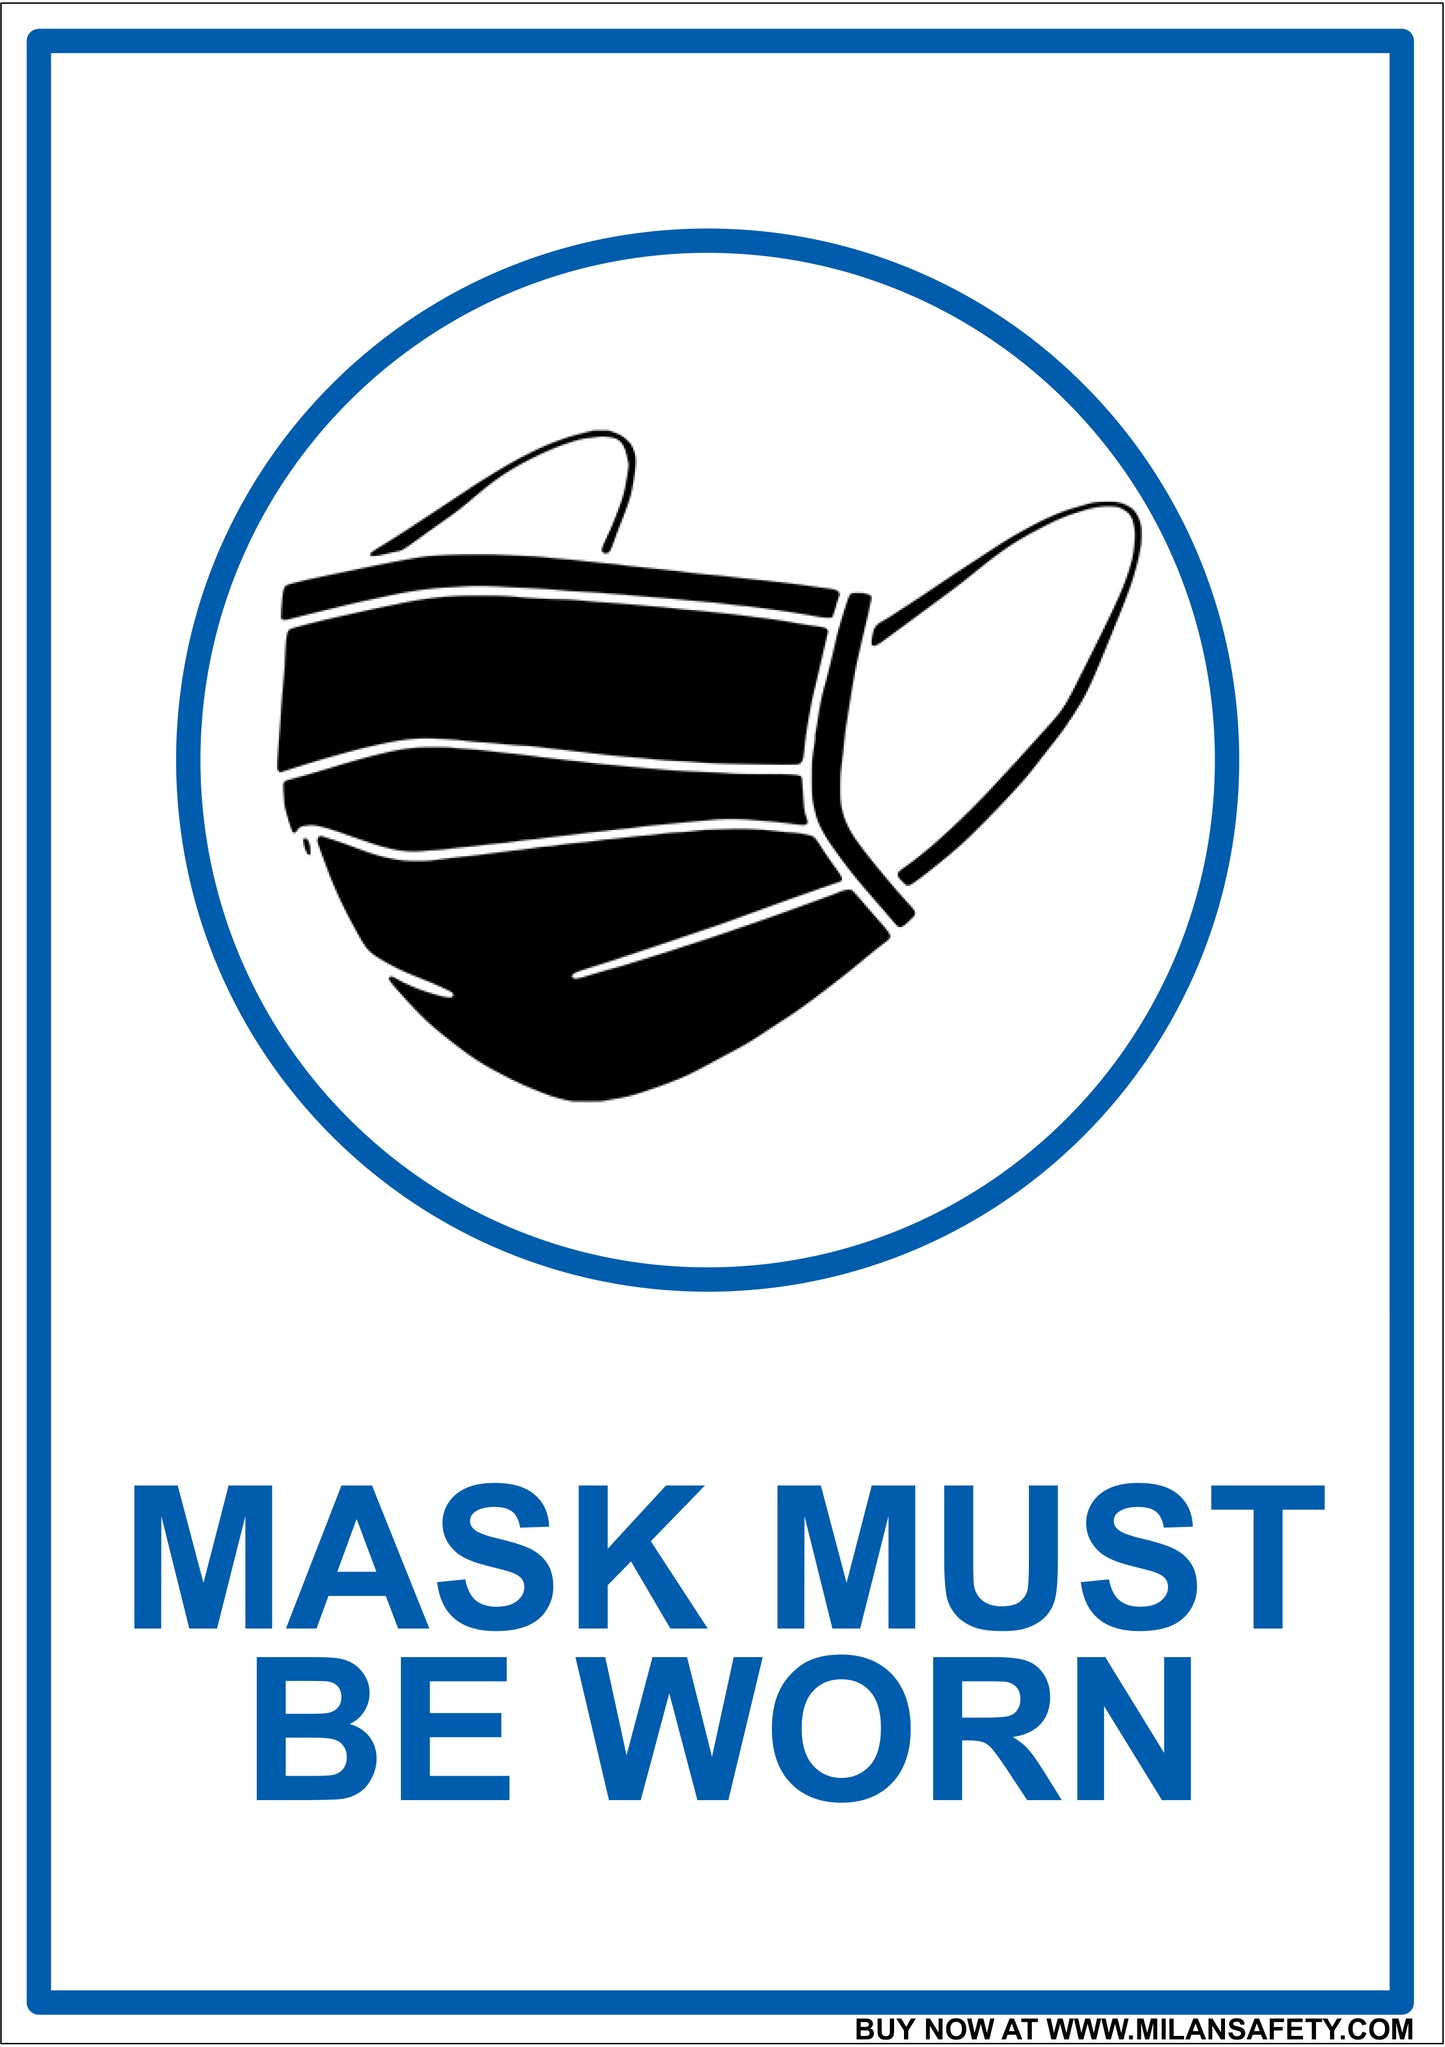 Mask must be worn signage